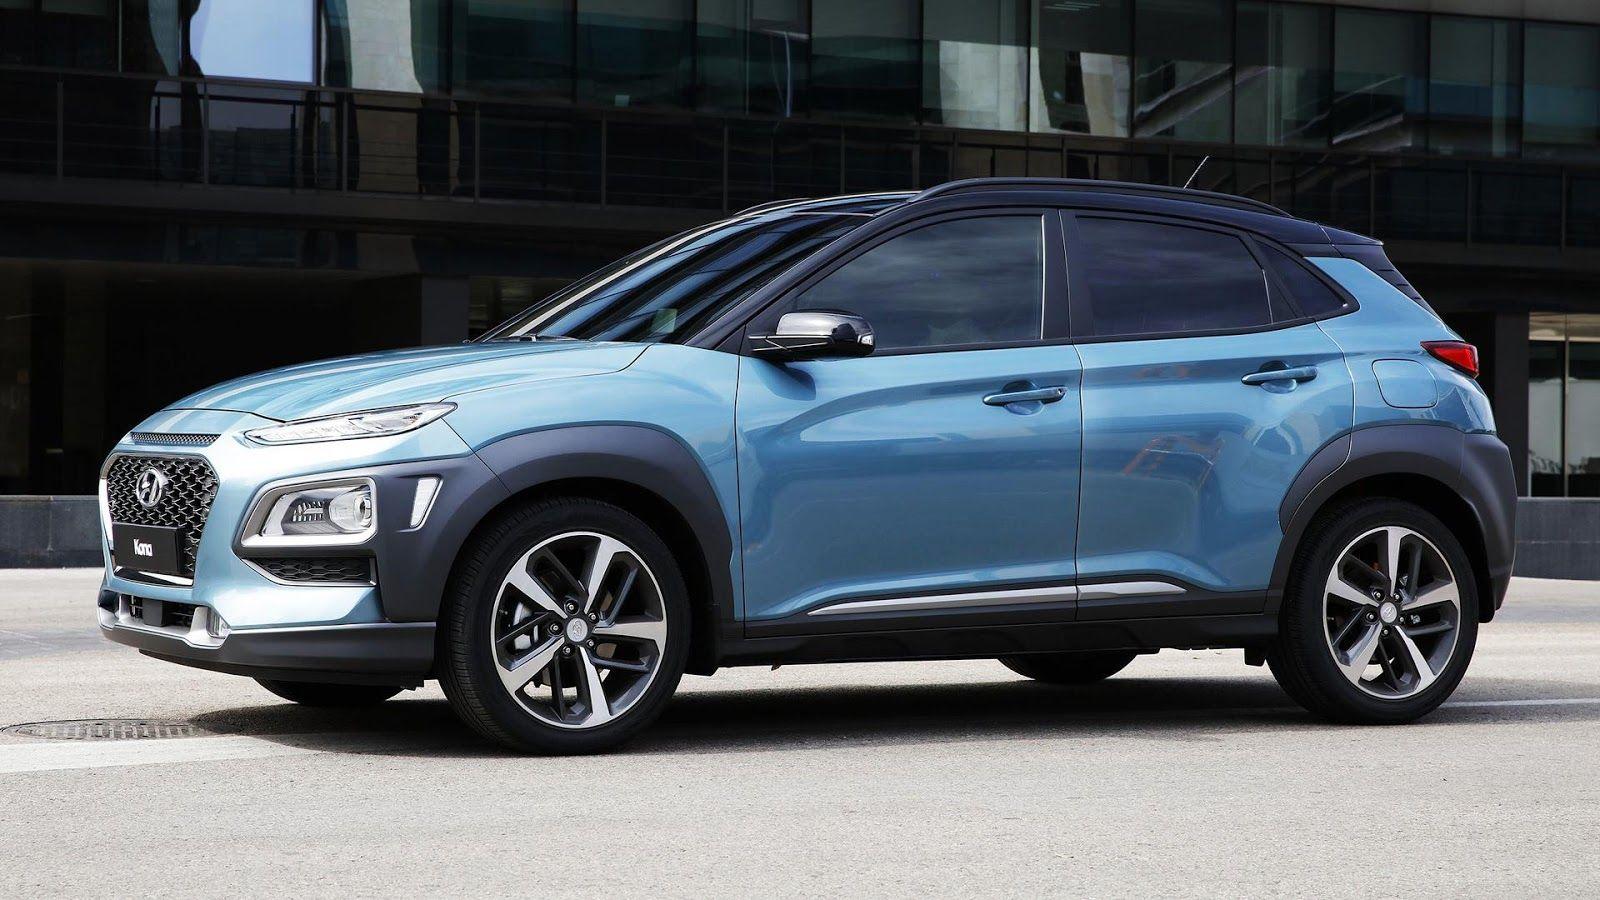 Electric Hyundai Kona Confirmed For 2018 With A Range Of Over 240